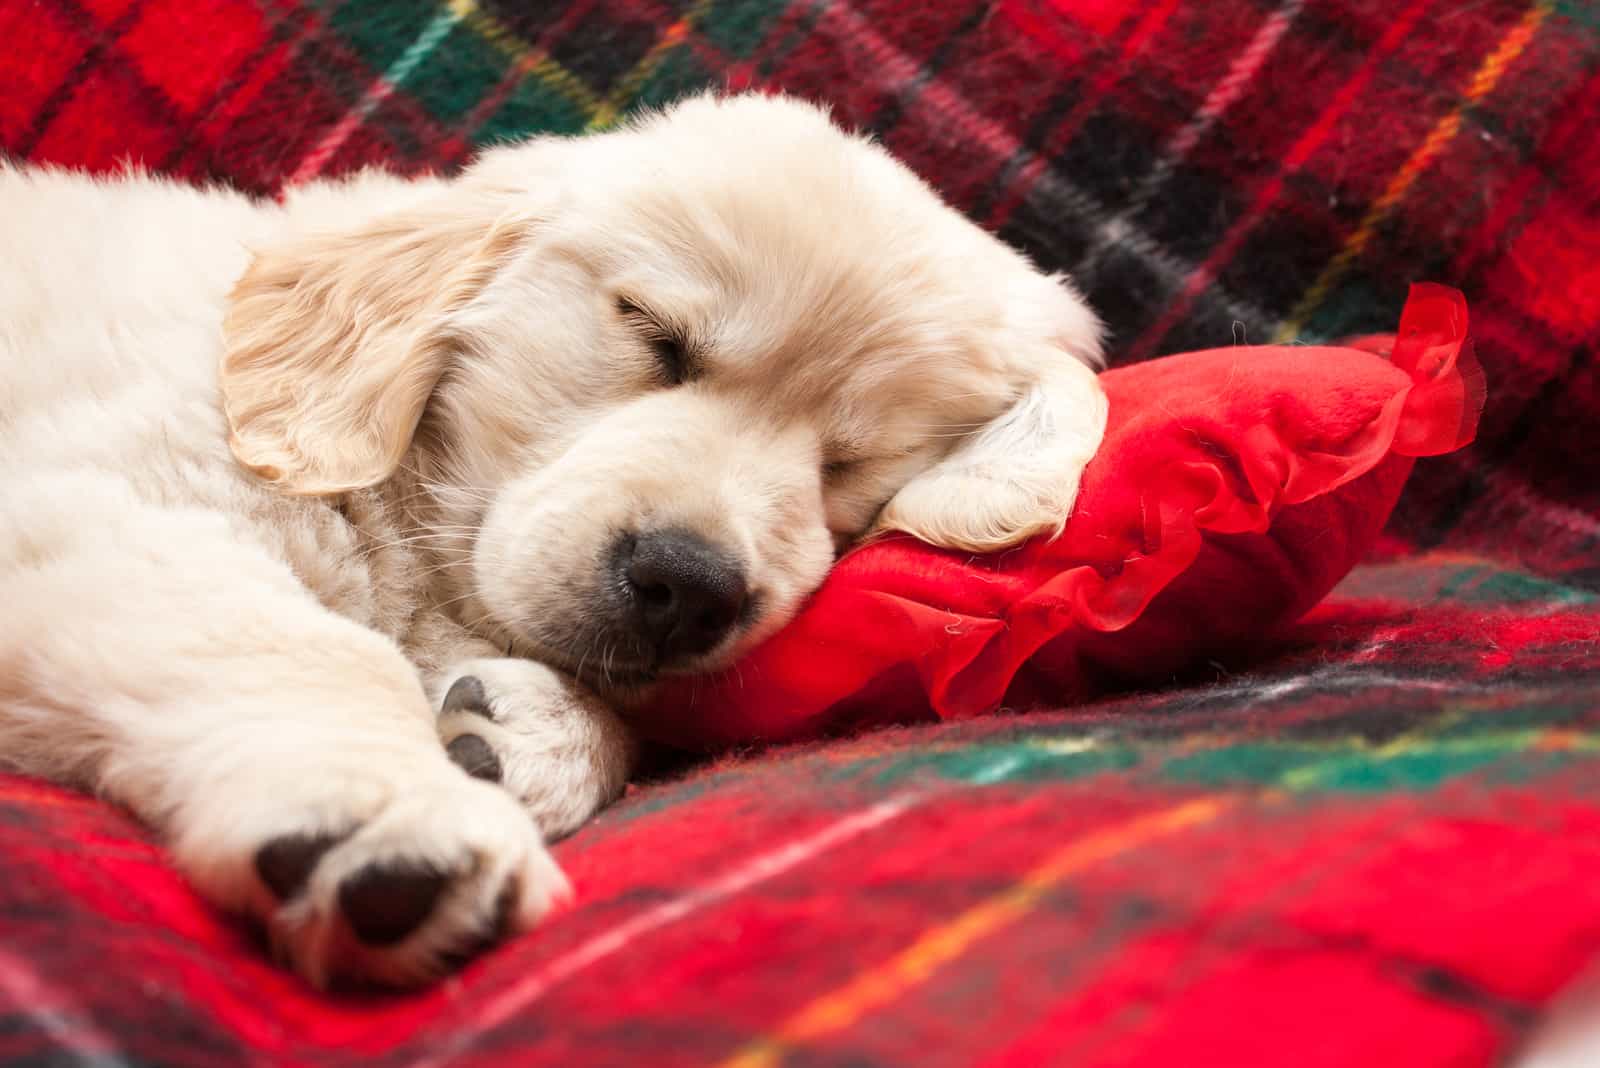 golden retriever puppy sleeping on the red bed